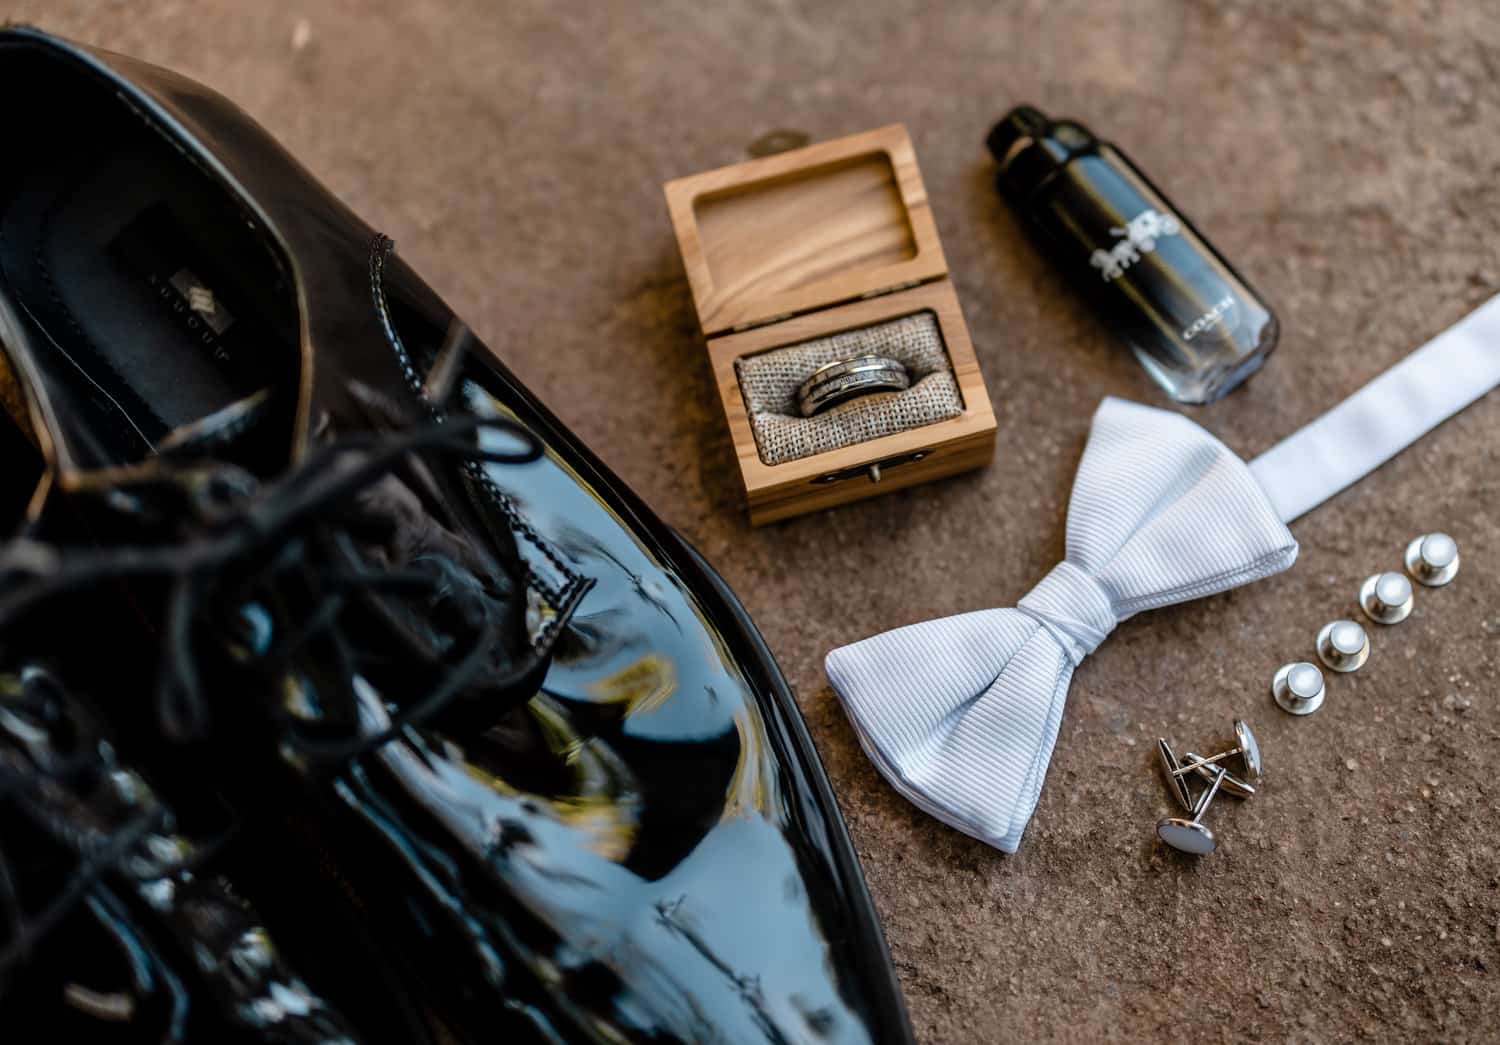 A pair of black shoes, a bowtie and a box of pearls.